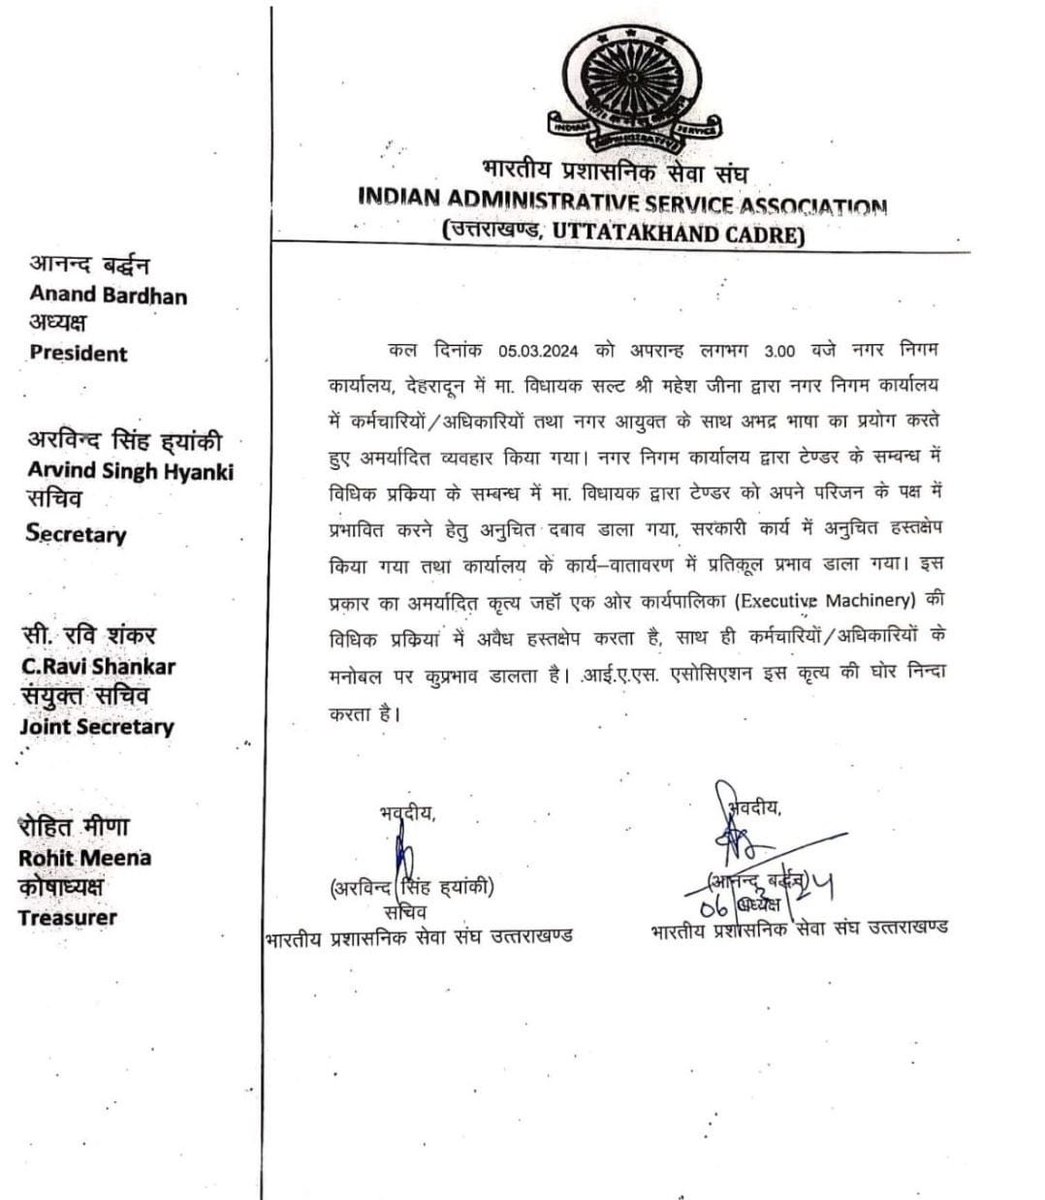 JUST IN | Letter from the IAS Association (Uttarakhand) alleged pressure from a #BJP MLA from Salt constituency, Mahesh Jeena, to secure tenders for his associates, @khabrimishra reports